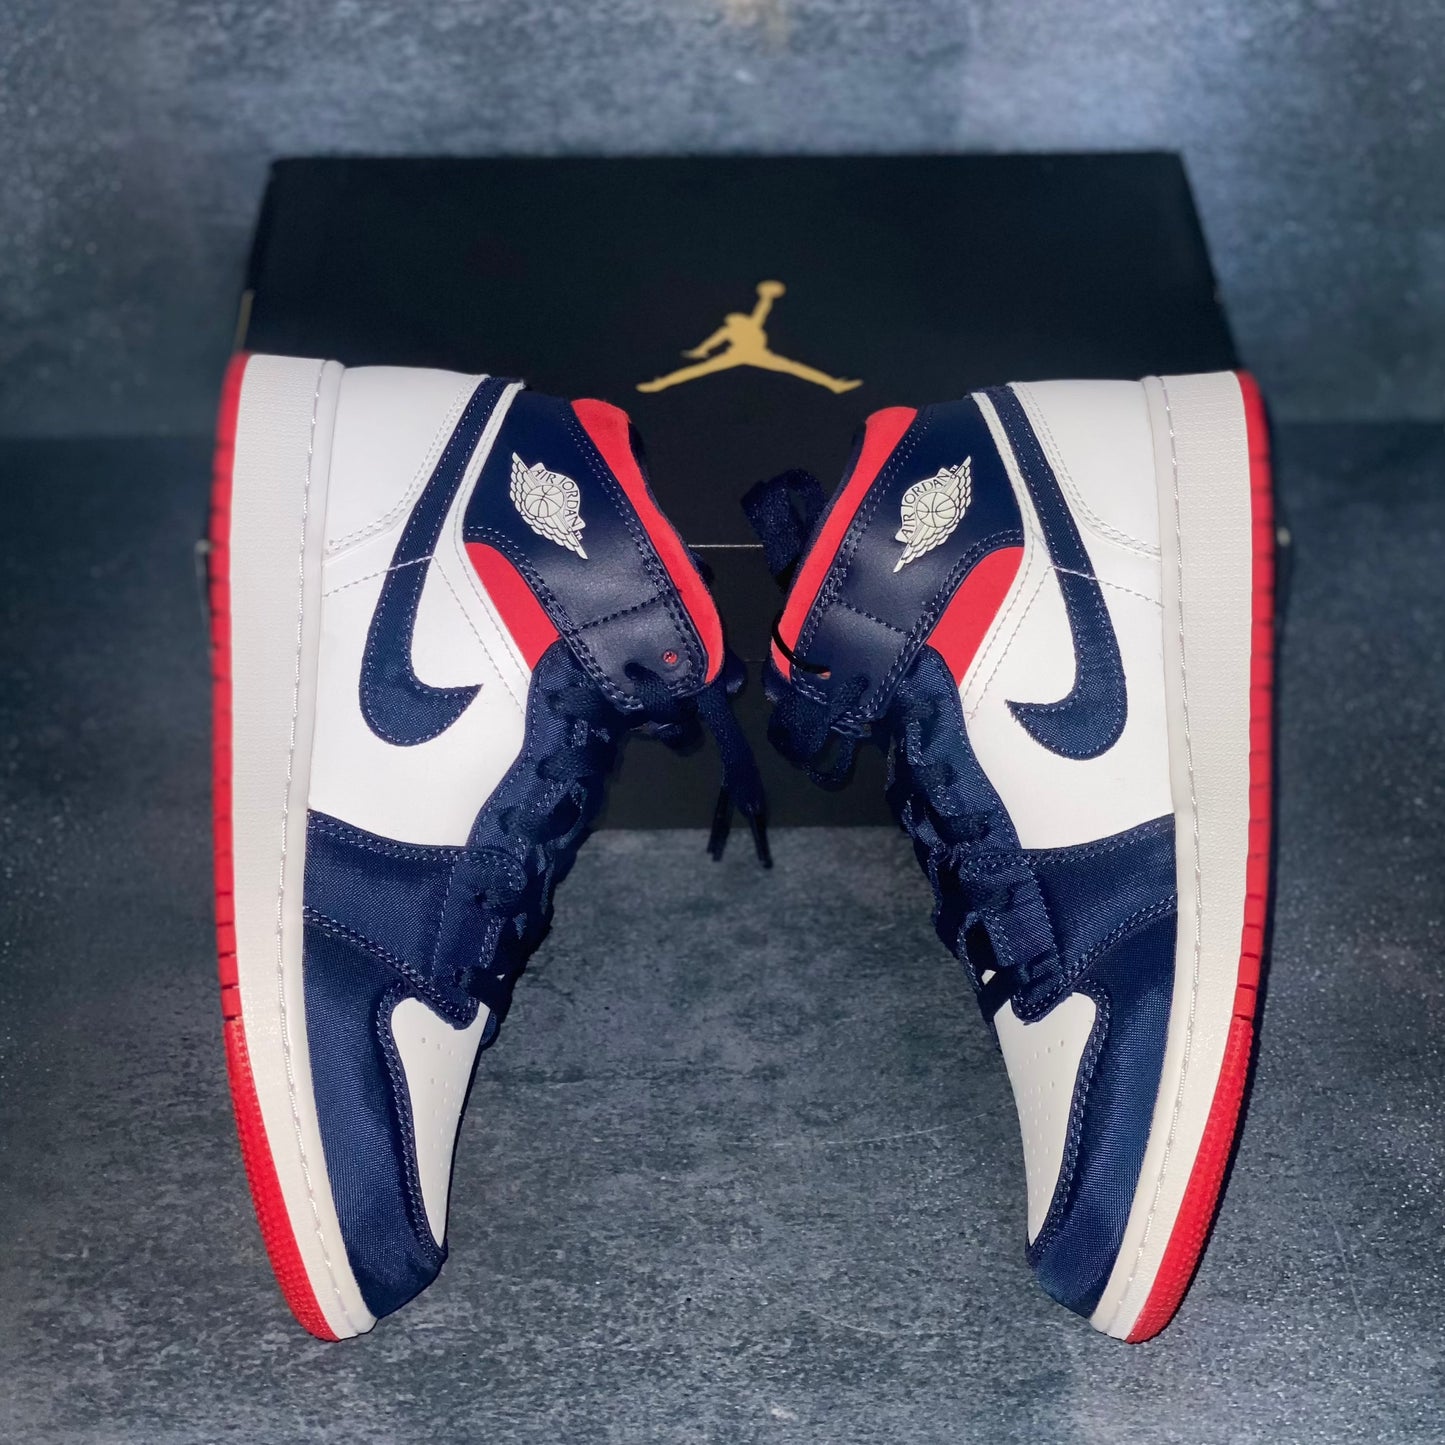 The lateral side of the red, white, and blue Nike Air Jordan 1 Mid sneakers with a black Air Jordan sneaker box.